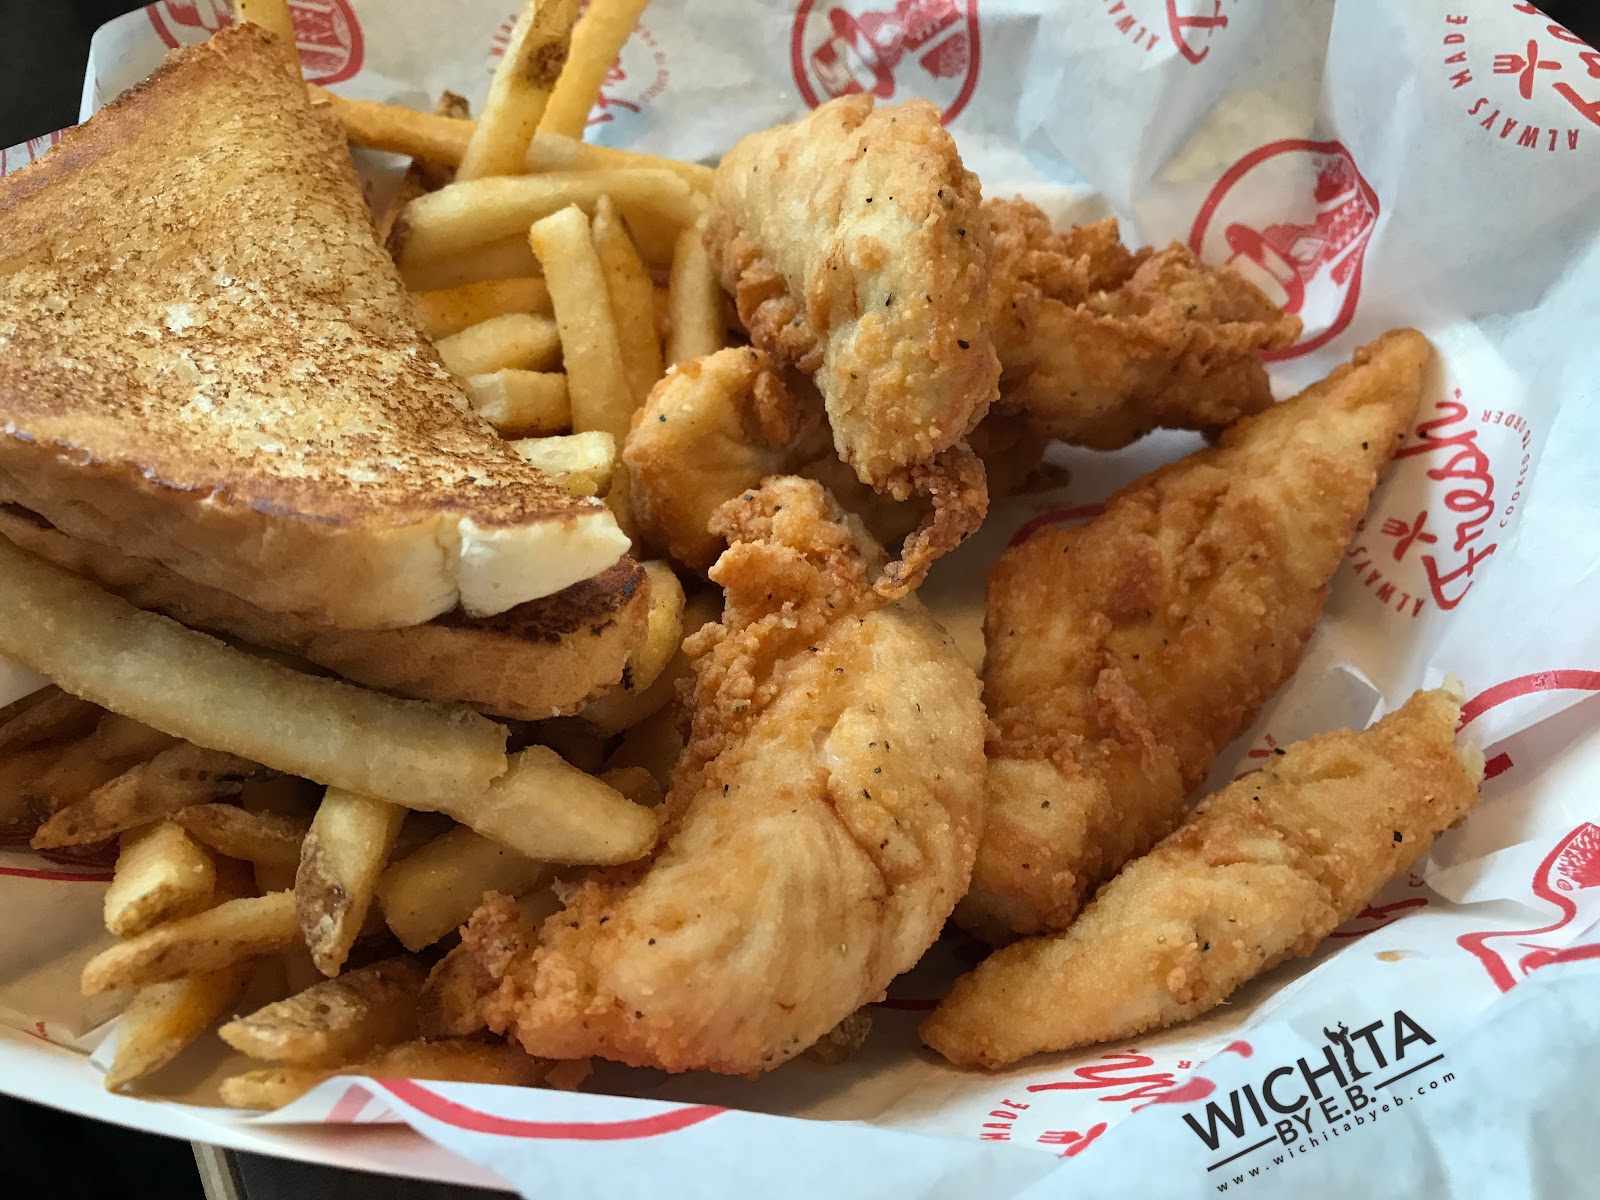 First Look at Slim Chickens – Wichita By E.B.